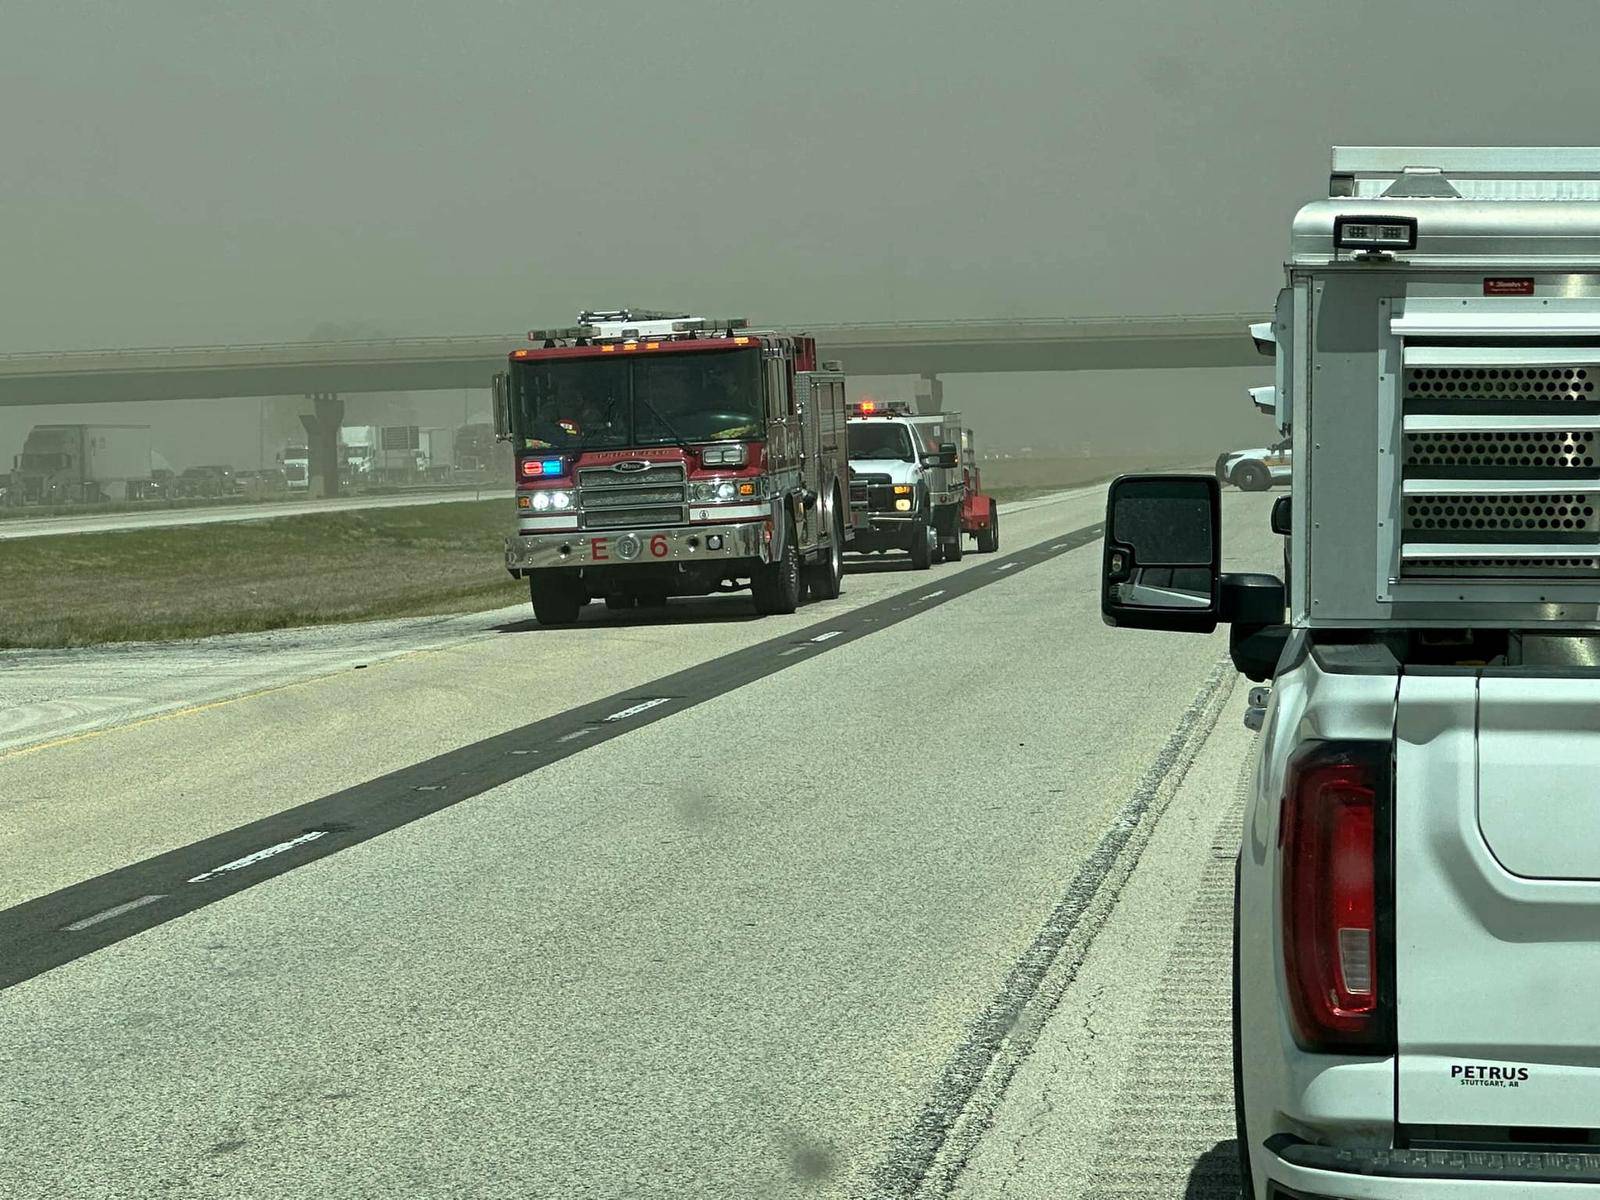 An emergency vehicle responds to a dust storm